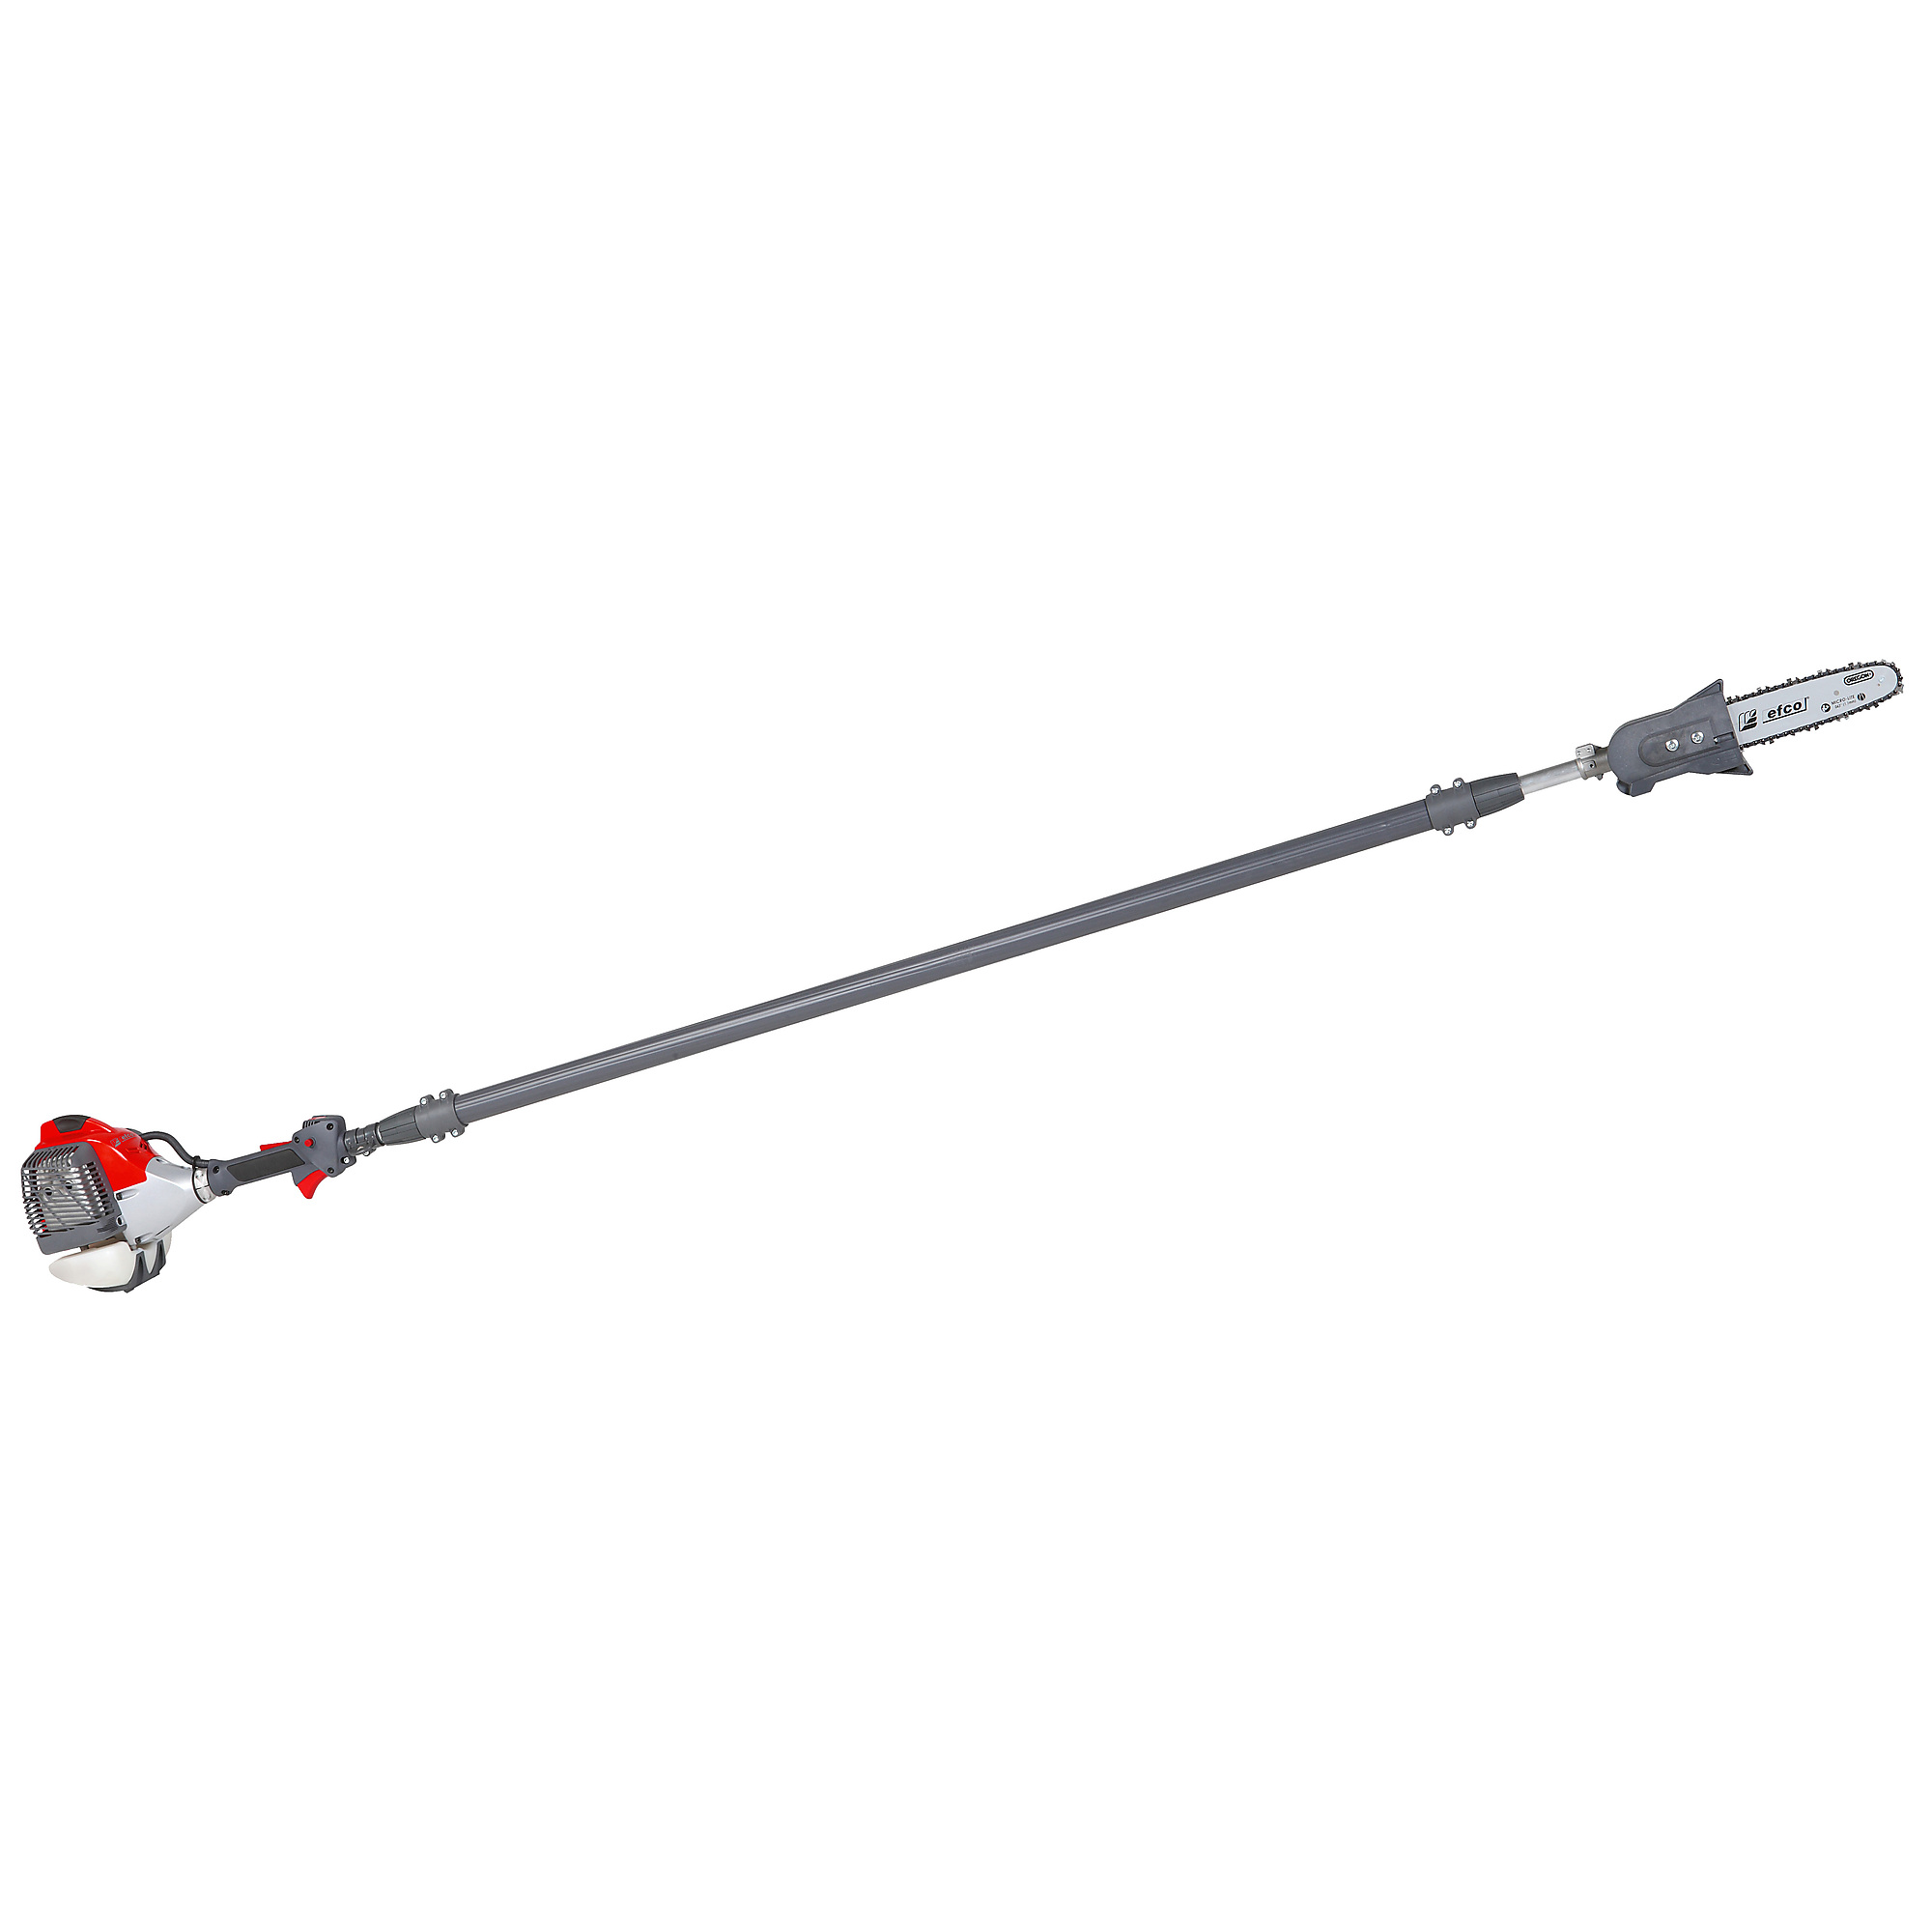 Efco, Professional Telescopic Pole Saw Adjustable Head, Bar Length 10 in, Operating Height 12.5 ft, Model PTX2710